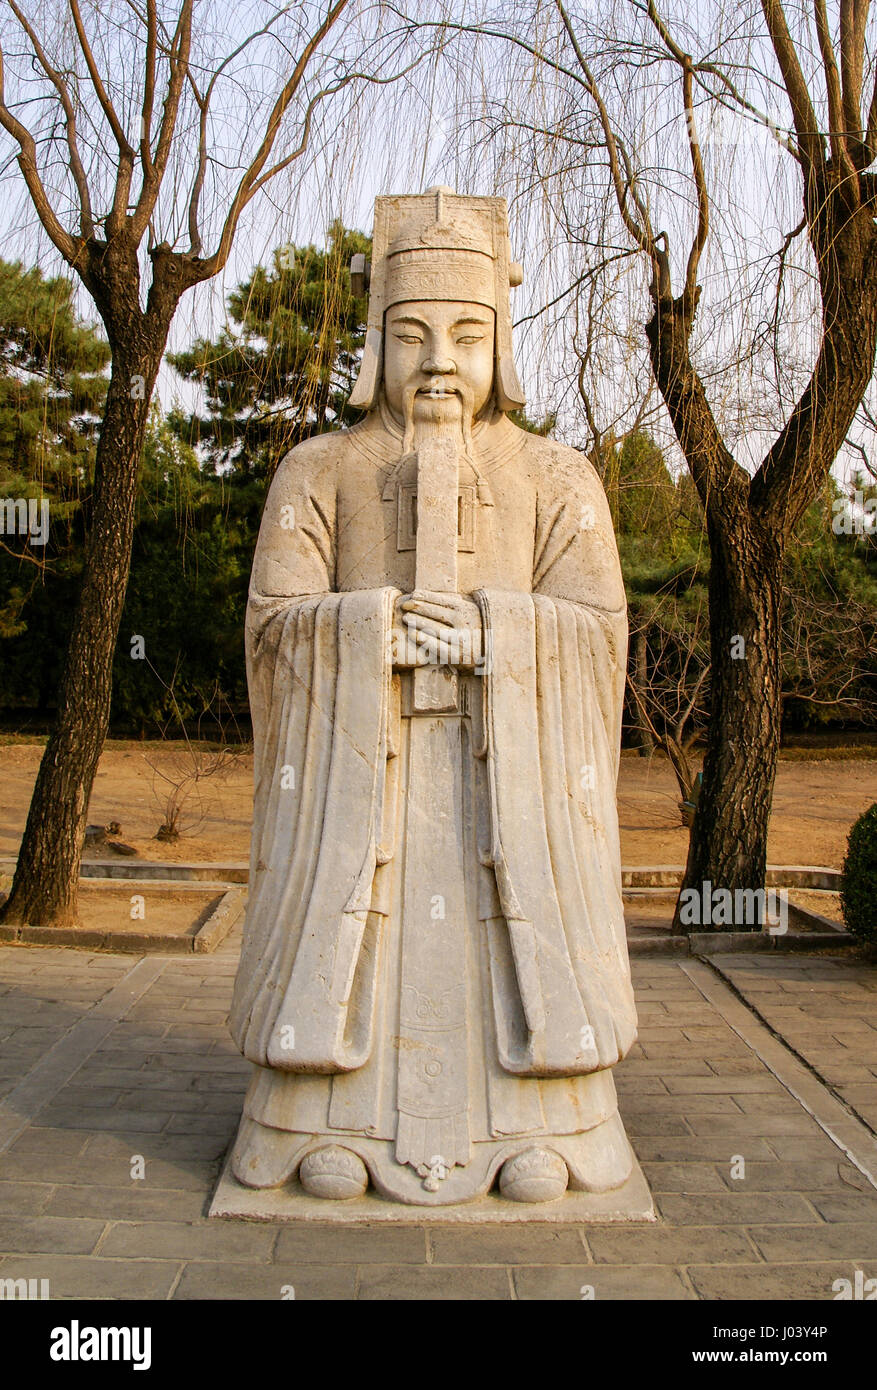 The statue of the meritorious official. Sacred Way, Ming Tombs, Beijing, China Stock Photo